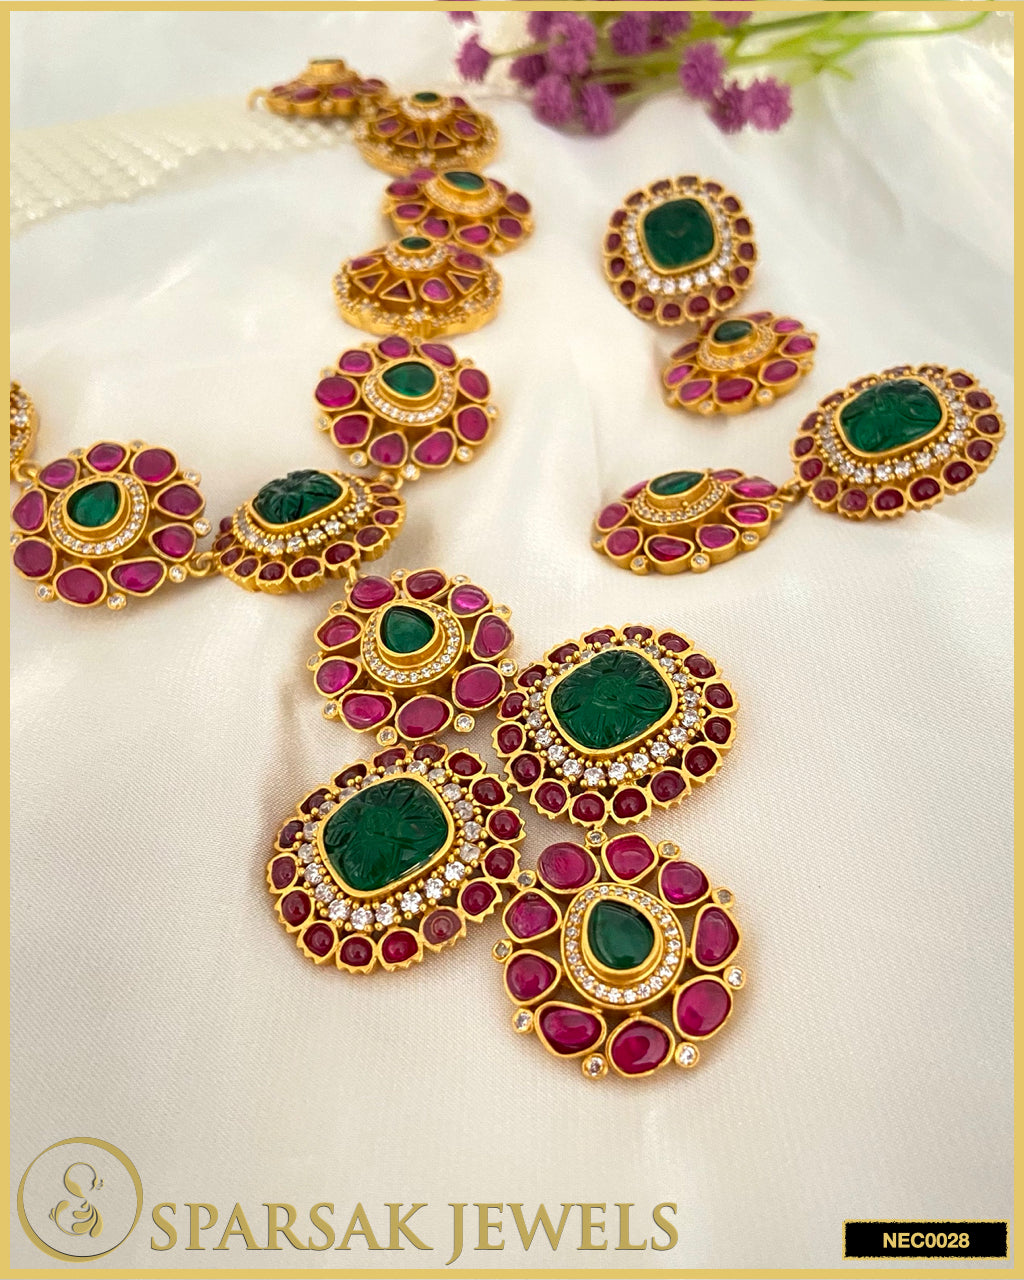 Gold Polished Kundan Necklace Set in Silver with Cubic Zirconia, Ruby, Emerald, and Carved Gemstones by Sparsak Jewels